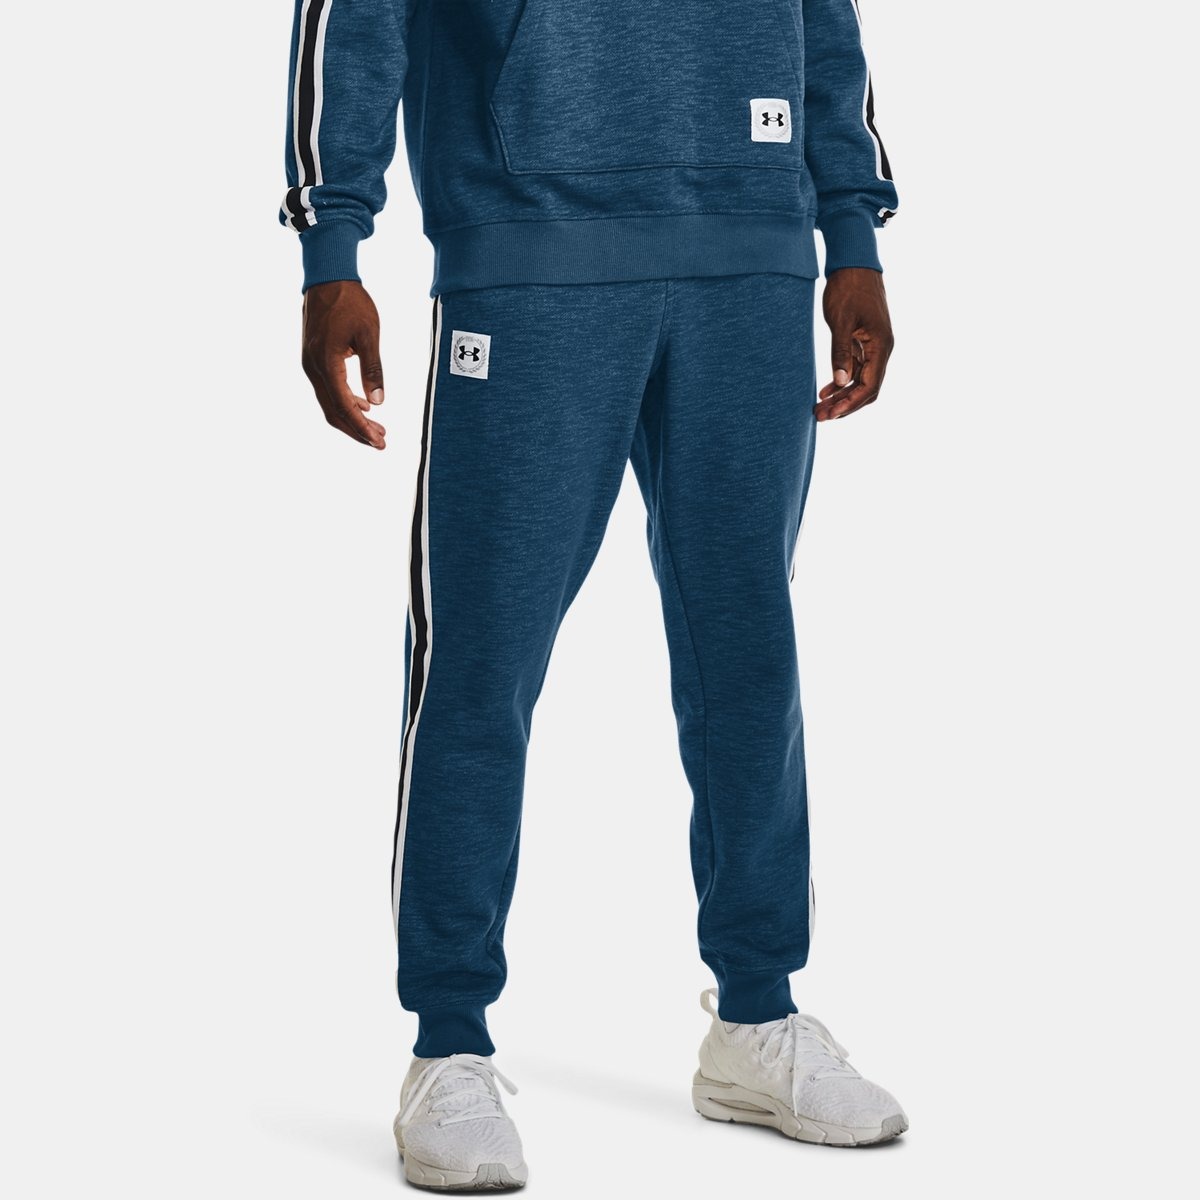 Gents Joggers Blue at Under Armour GOOFASH